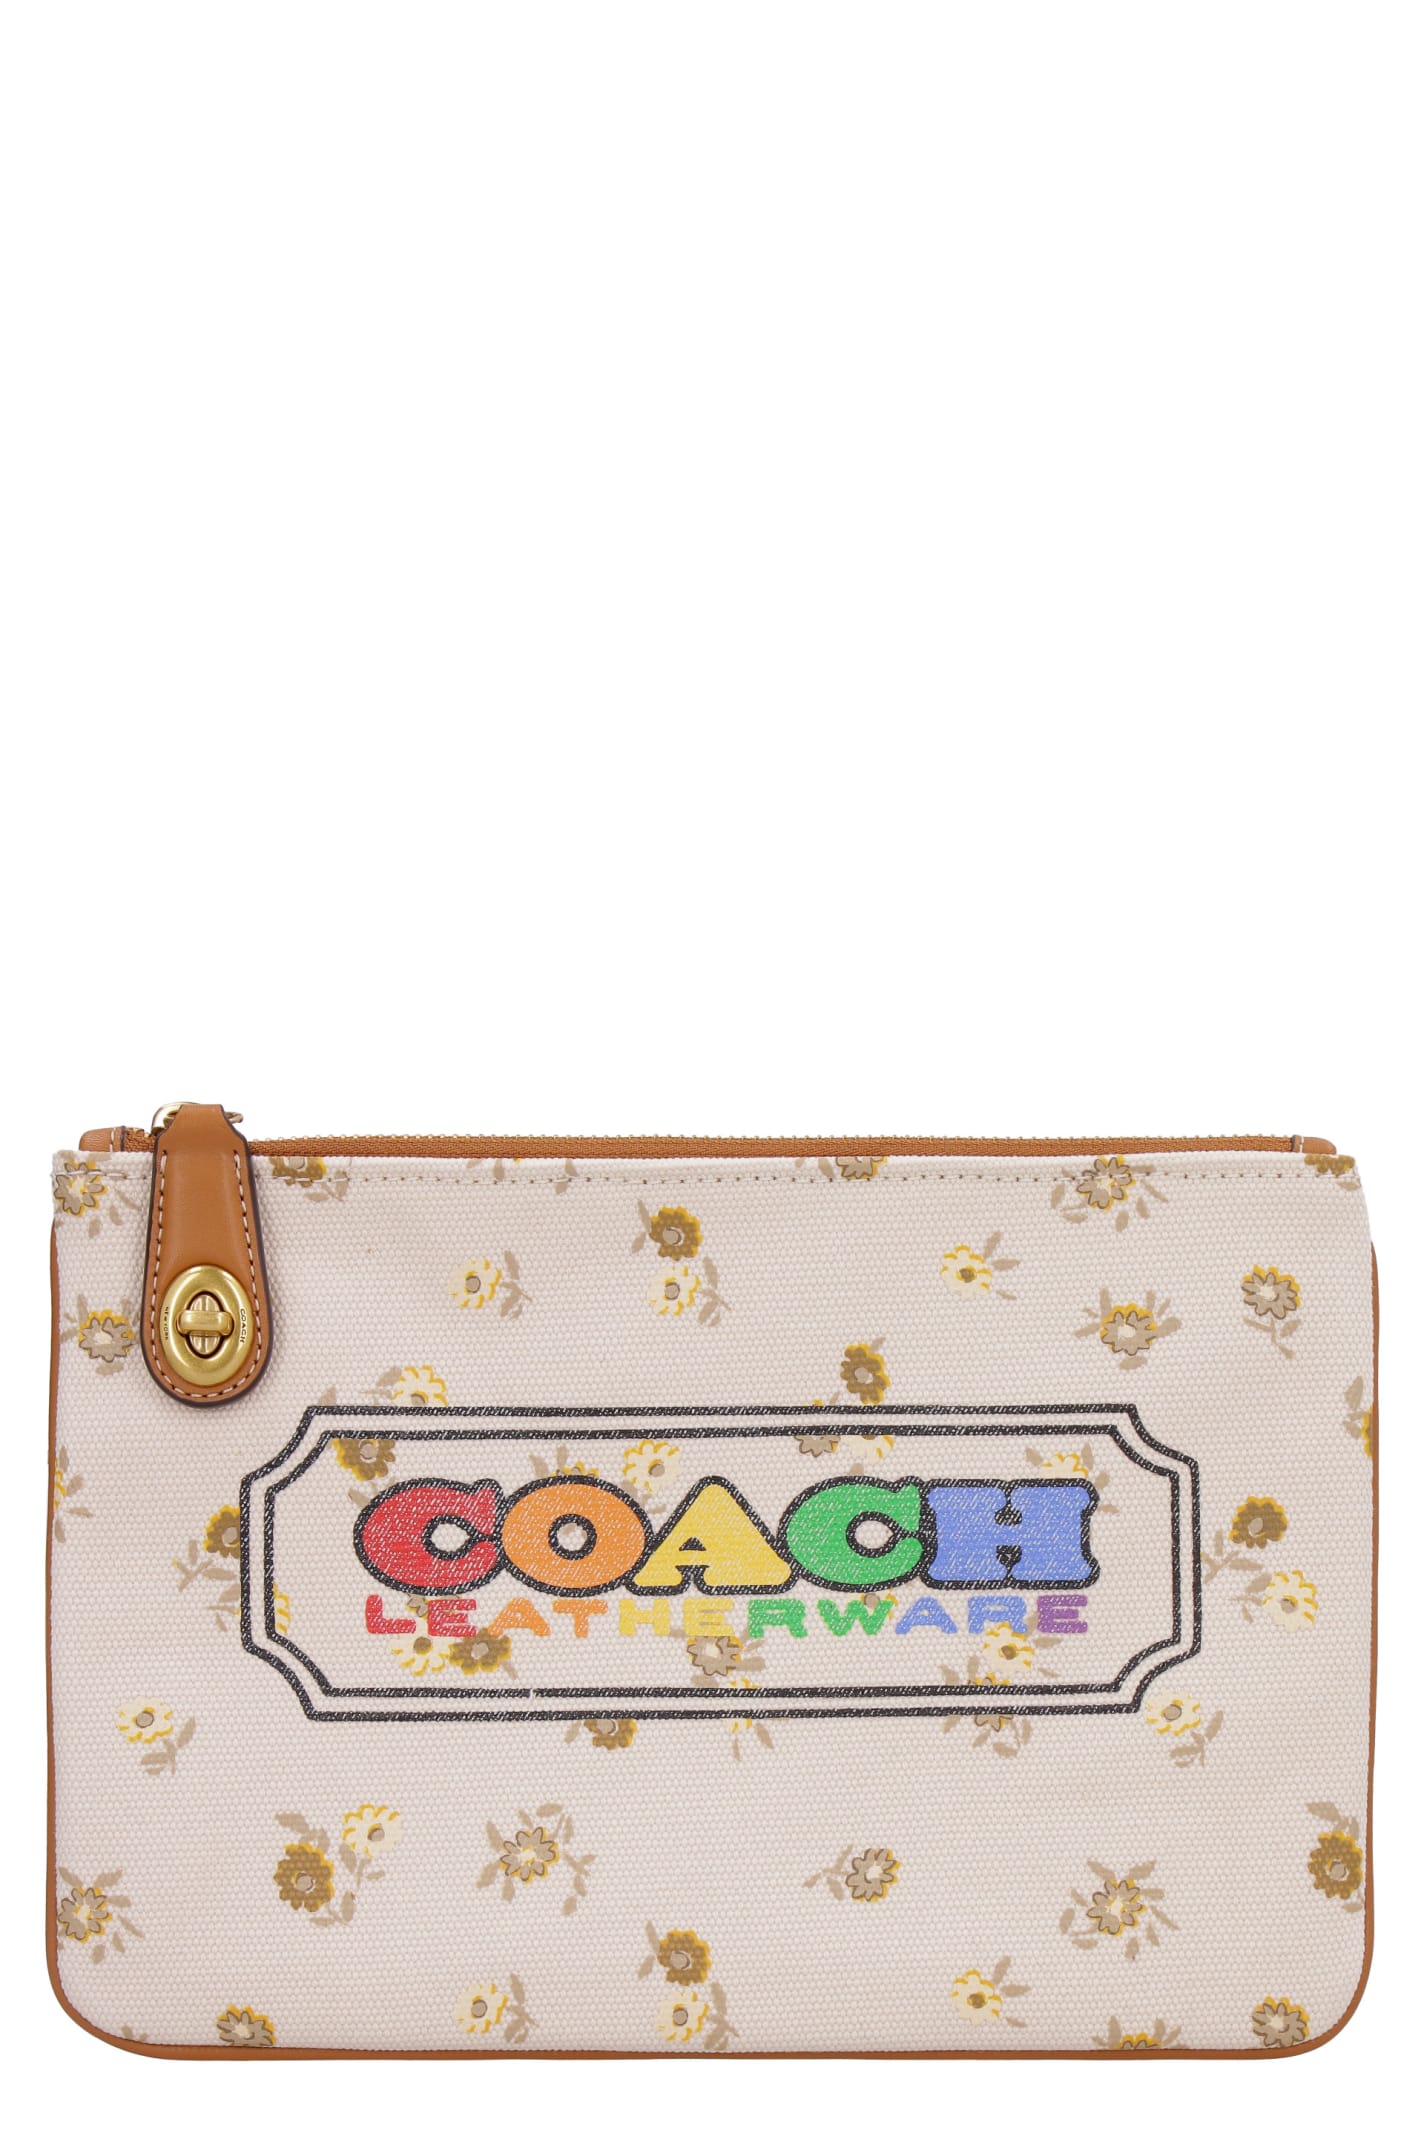 Coach Printed Flat Pouch